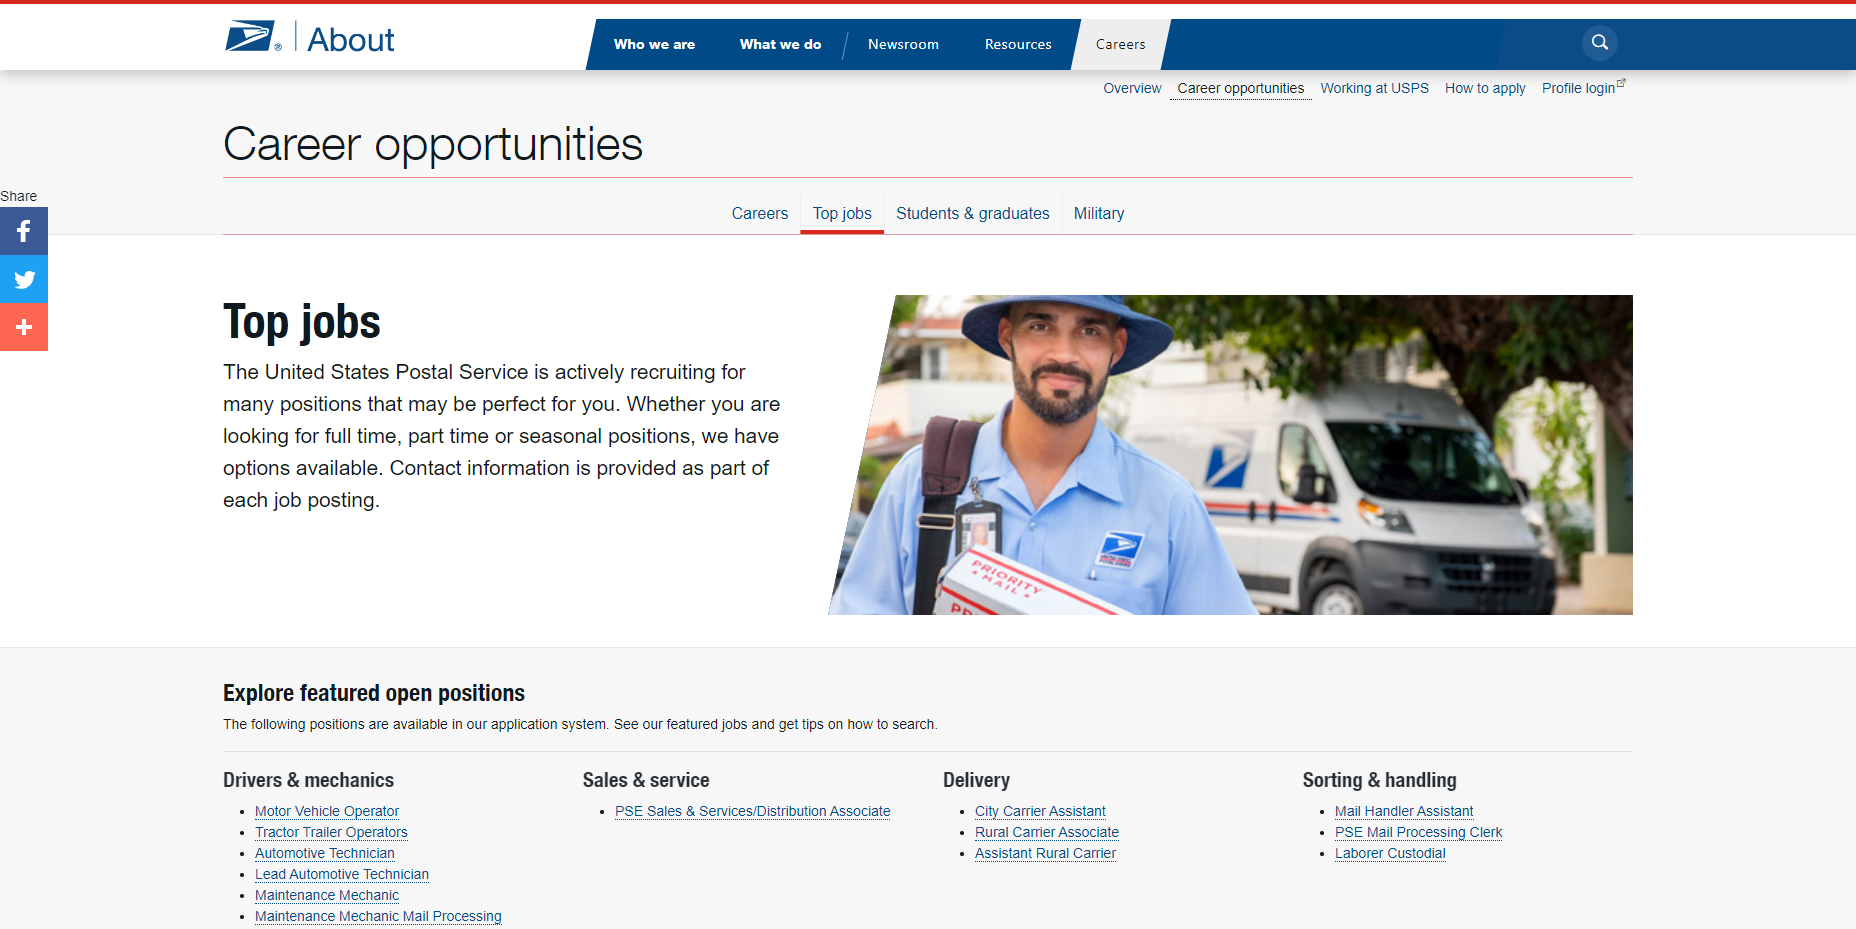 USPS Worker Shares PSA on New Address Change Policy